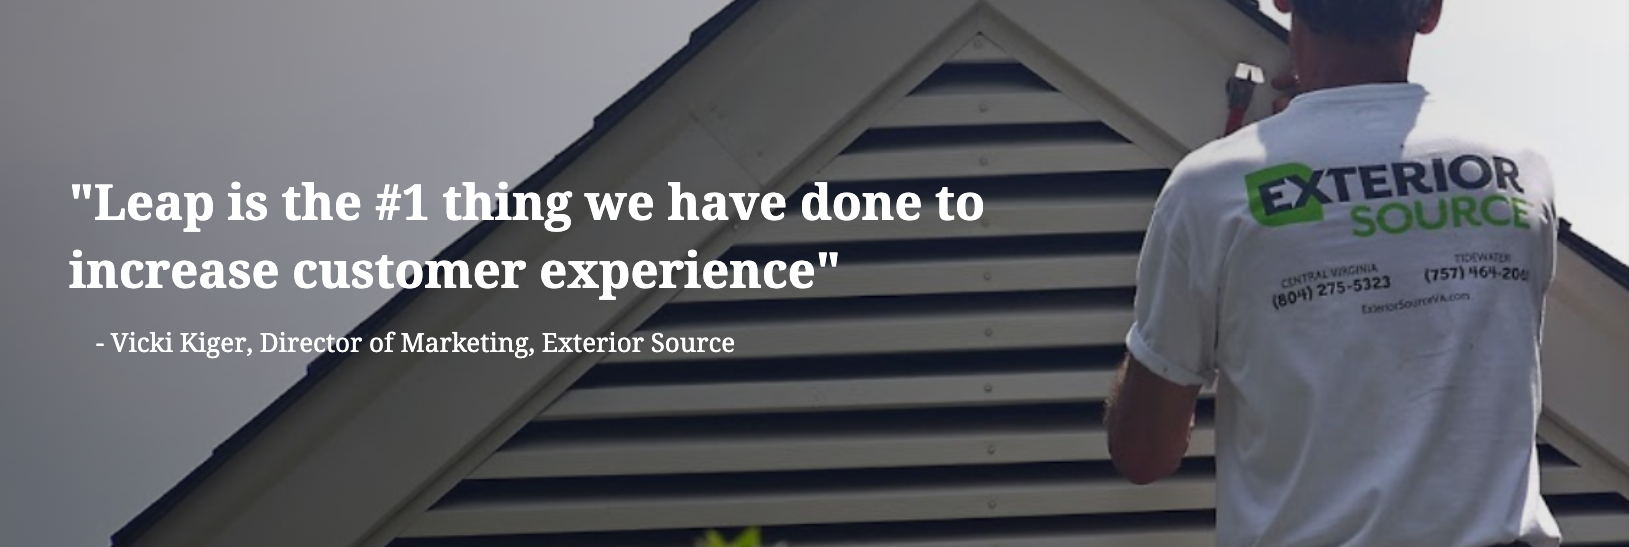 Exterior Source contractor with quote "Leap is the #1 thing we have done to increase customer experience."